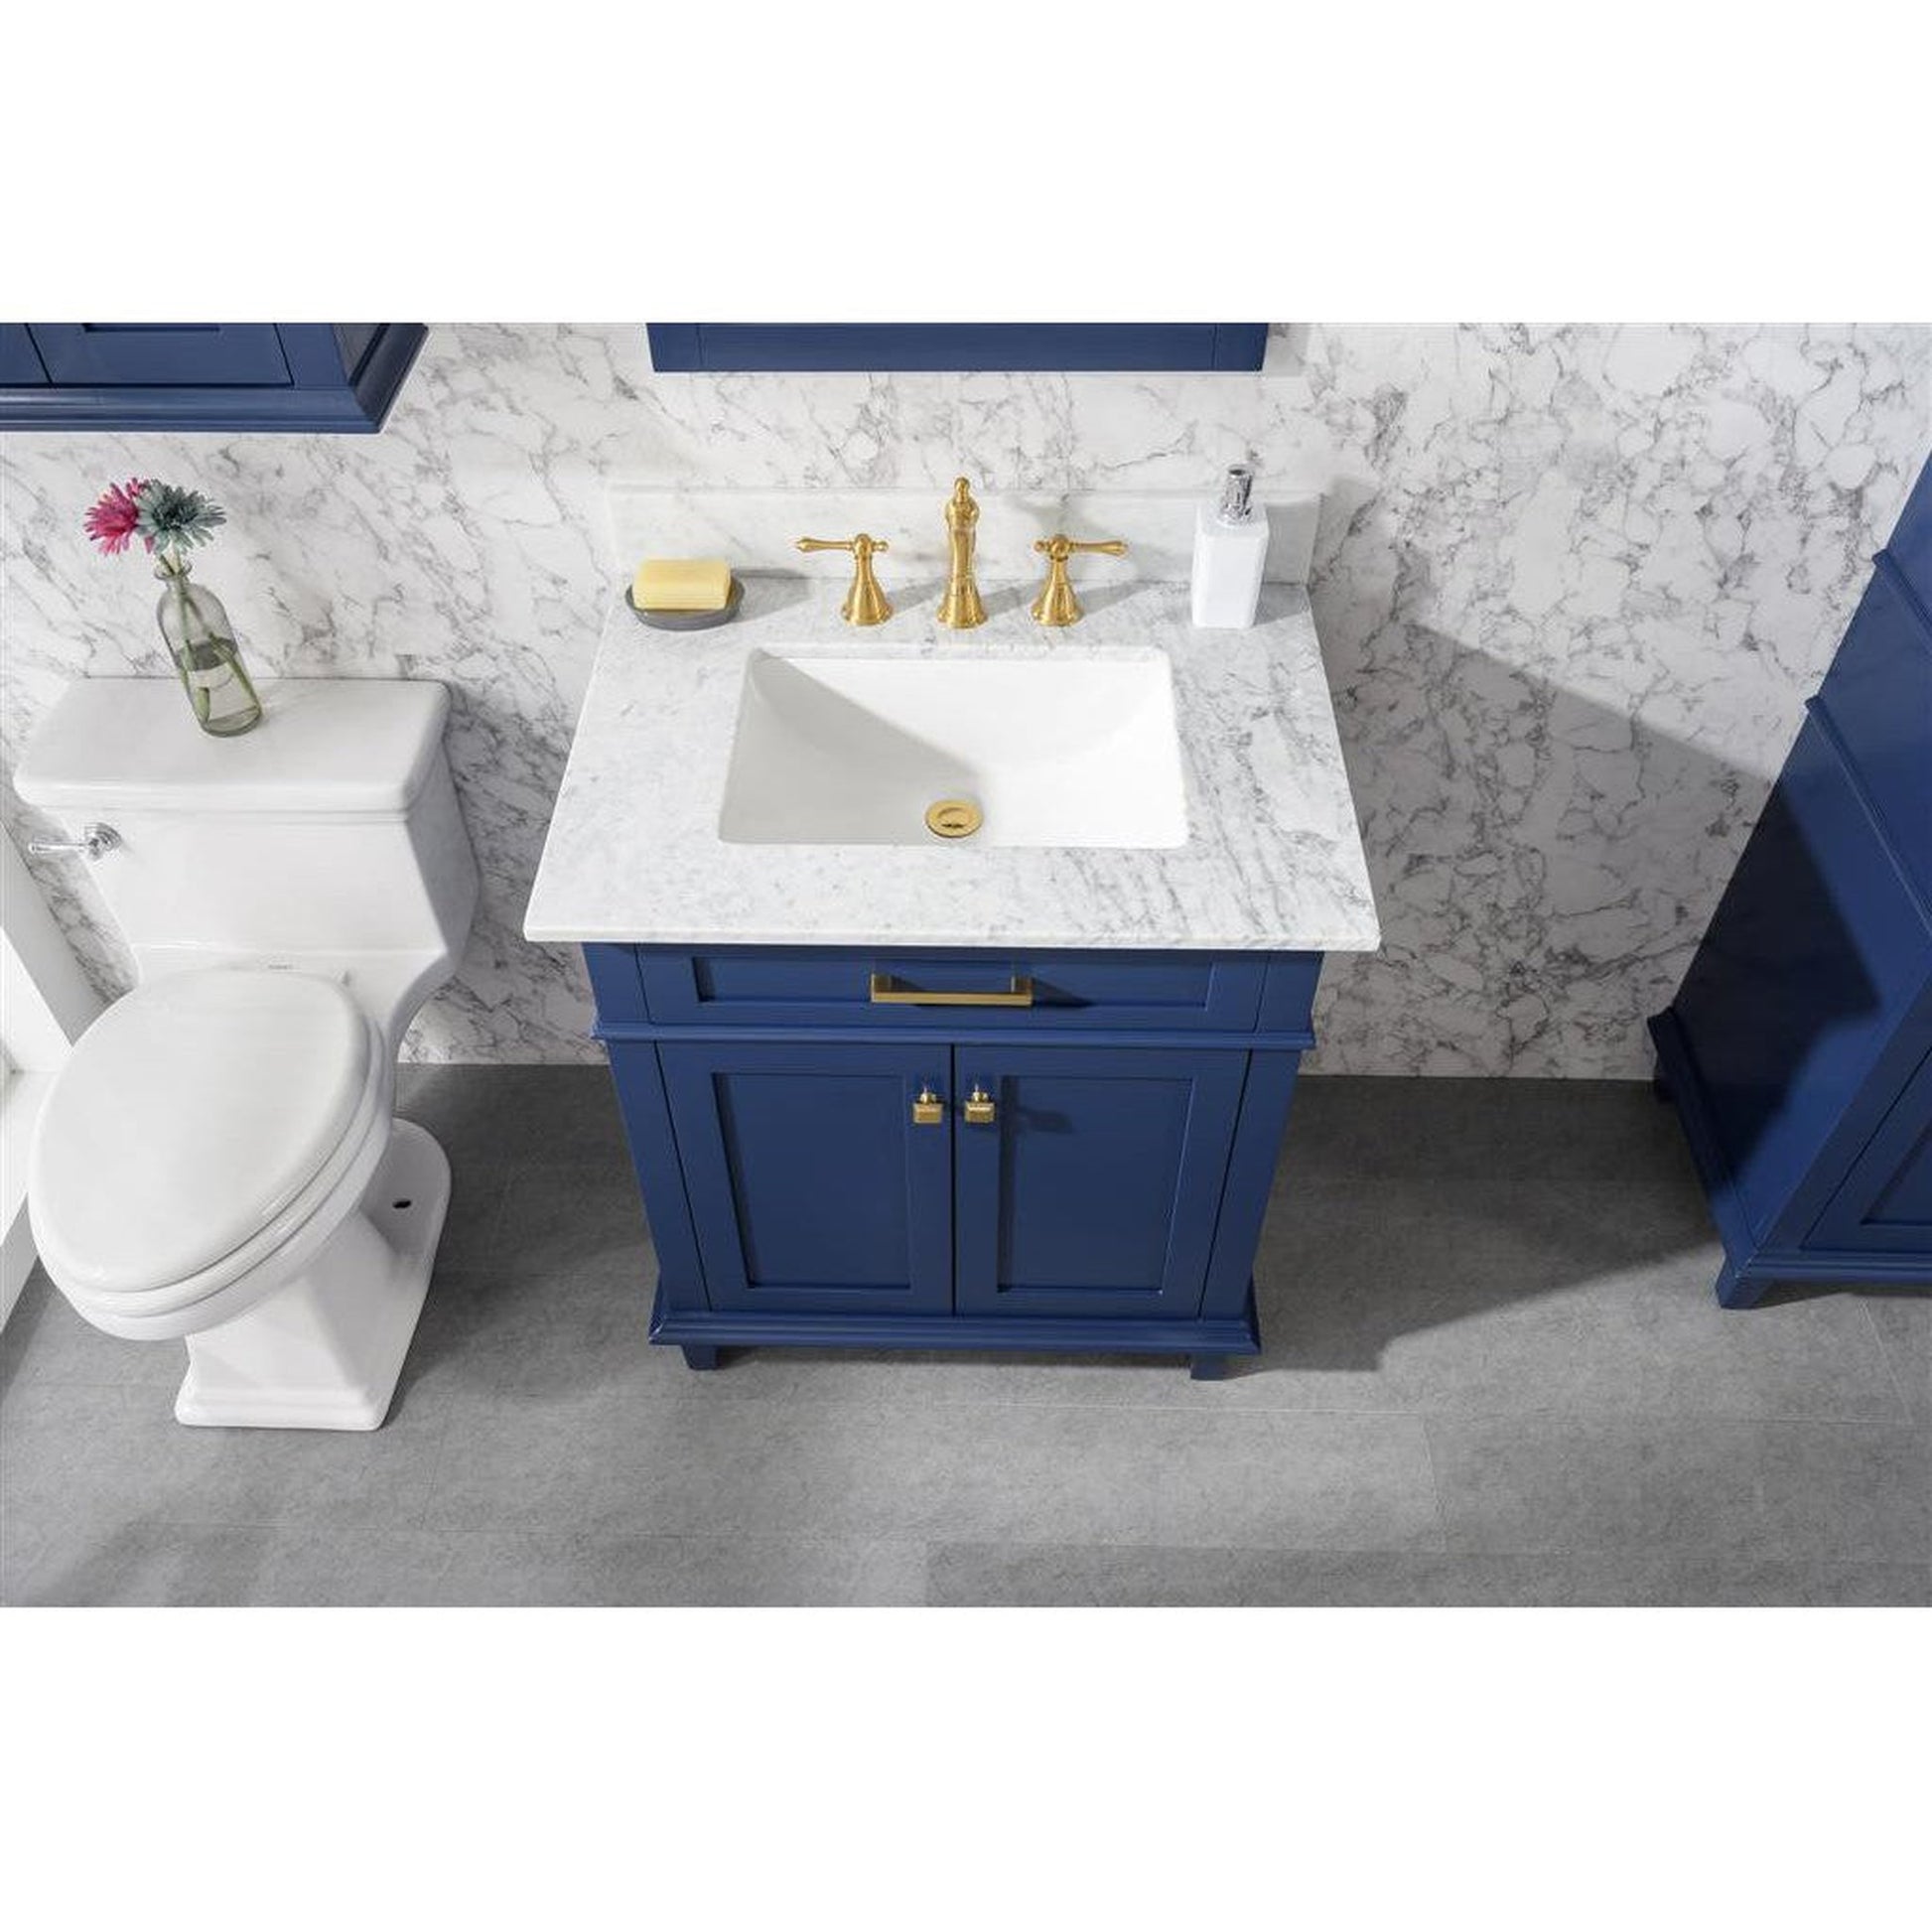 Legion Furniture WLF2230 30" Blue Freestanding Vanity With White Carrara Marble Top and White Ceramic Sink